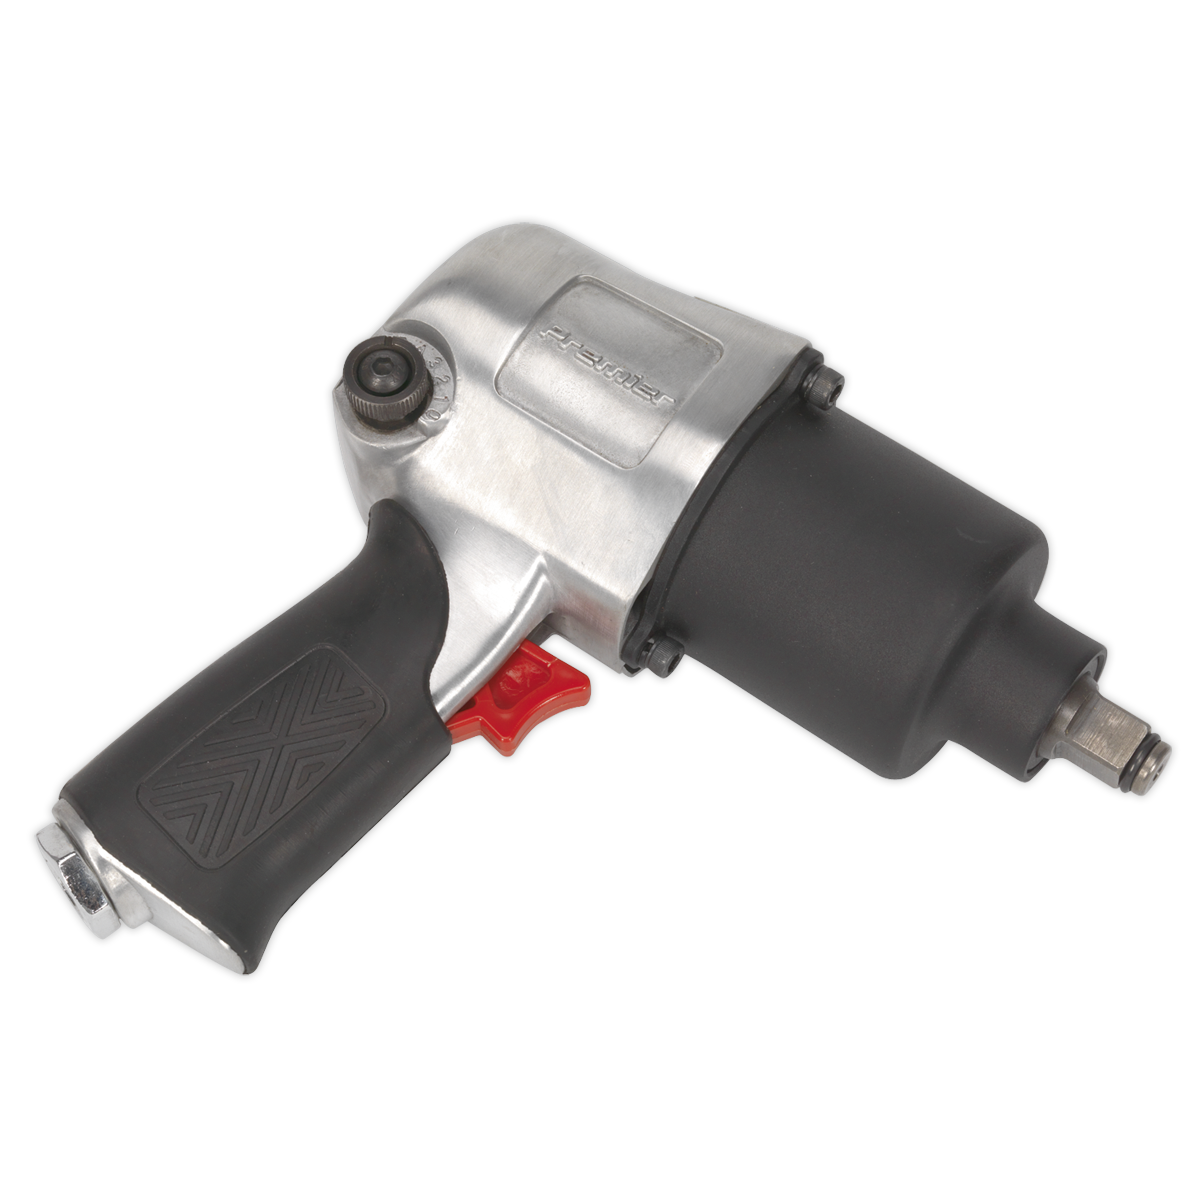 Air Impact Wrench 1/2"Sq Drive - Twin Hammer | Powerful 1/2"Sq drive impact wrench with twin hammer mechanism for increased torque. | toolforce.ie